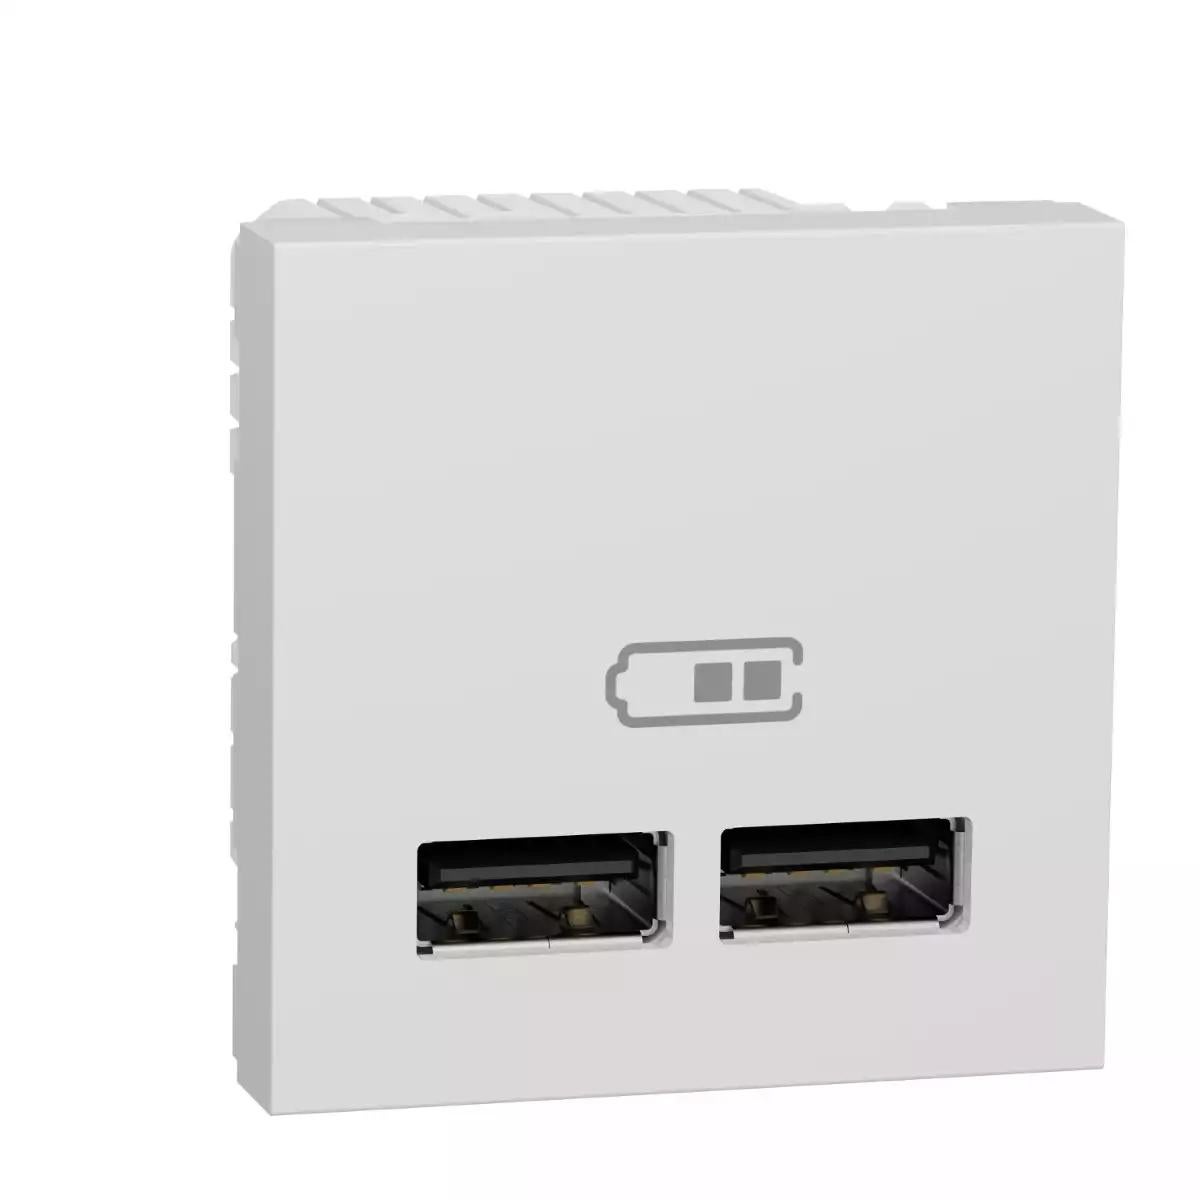 New Unica - 2 USB charger 1 A - 2 modules - type A - white